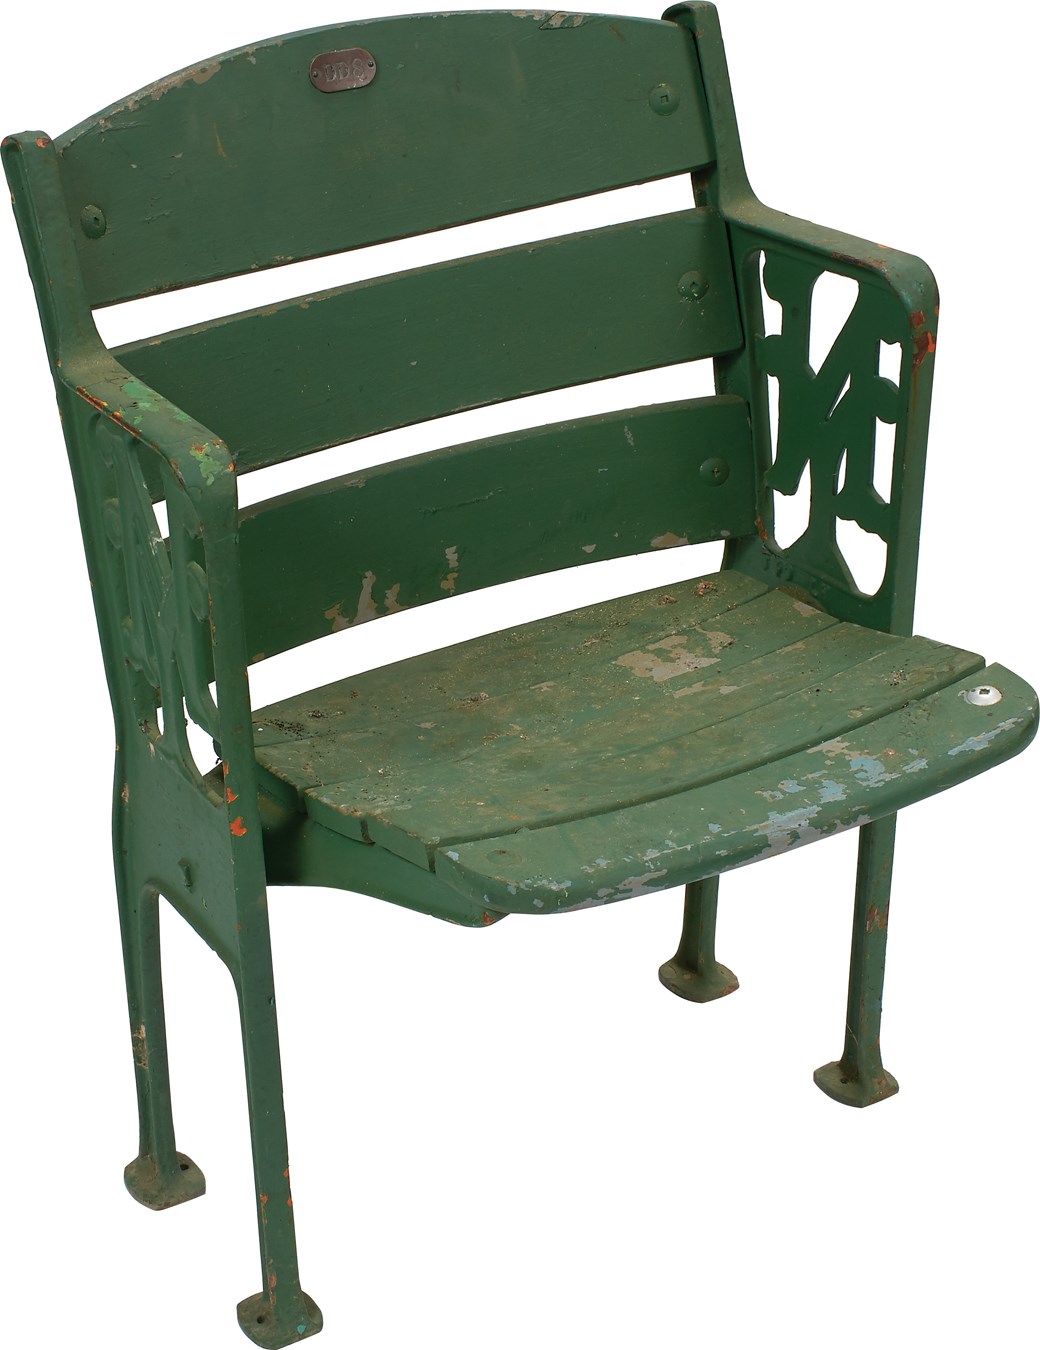 Polo Grounds Seat with Double Figural Sides